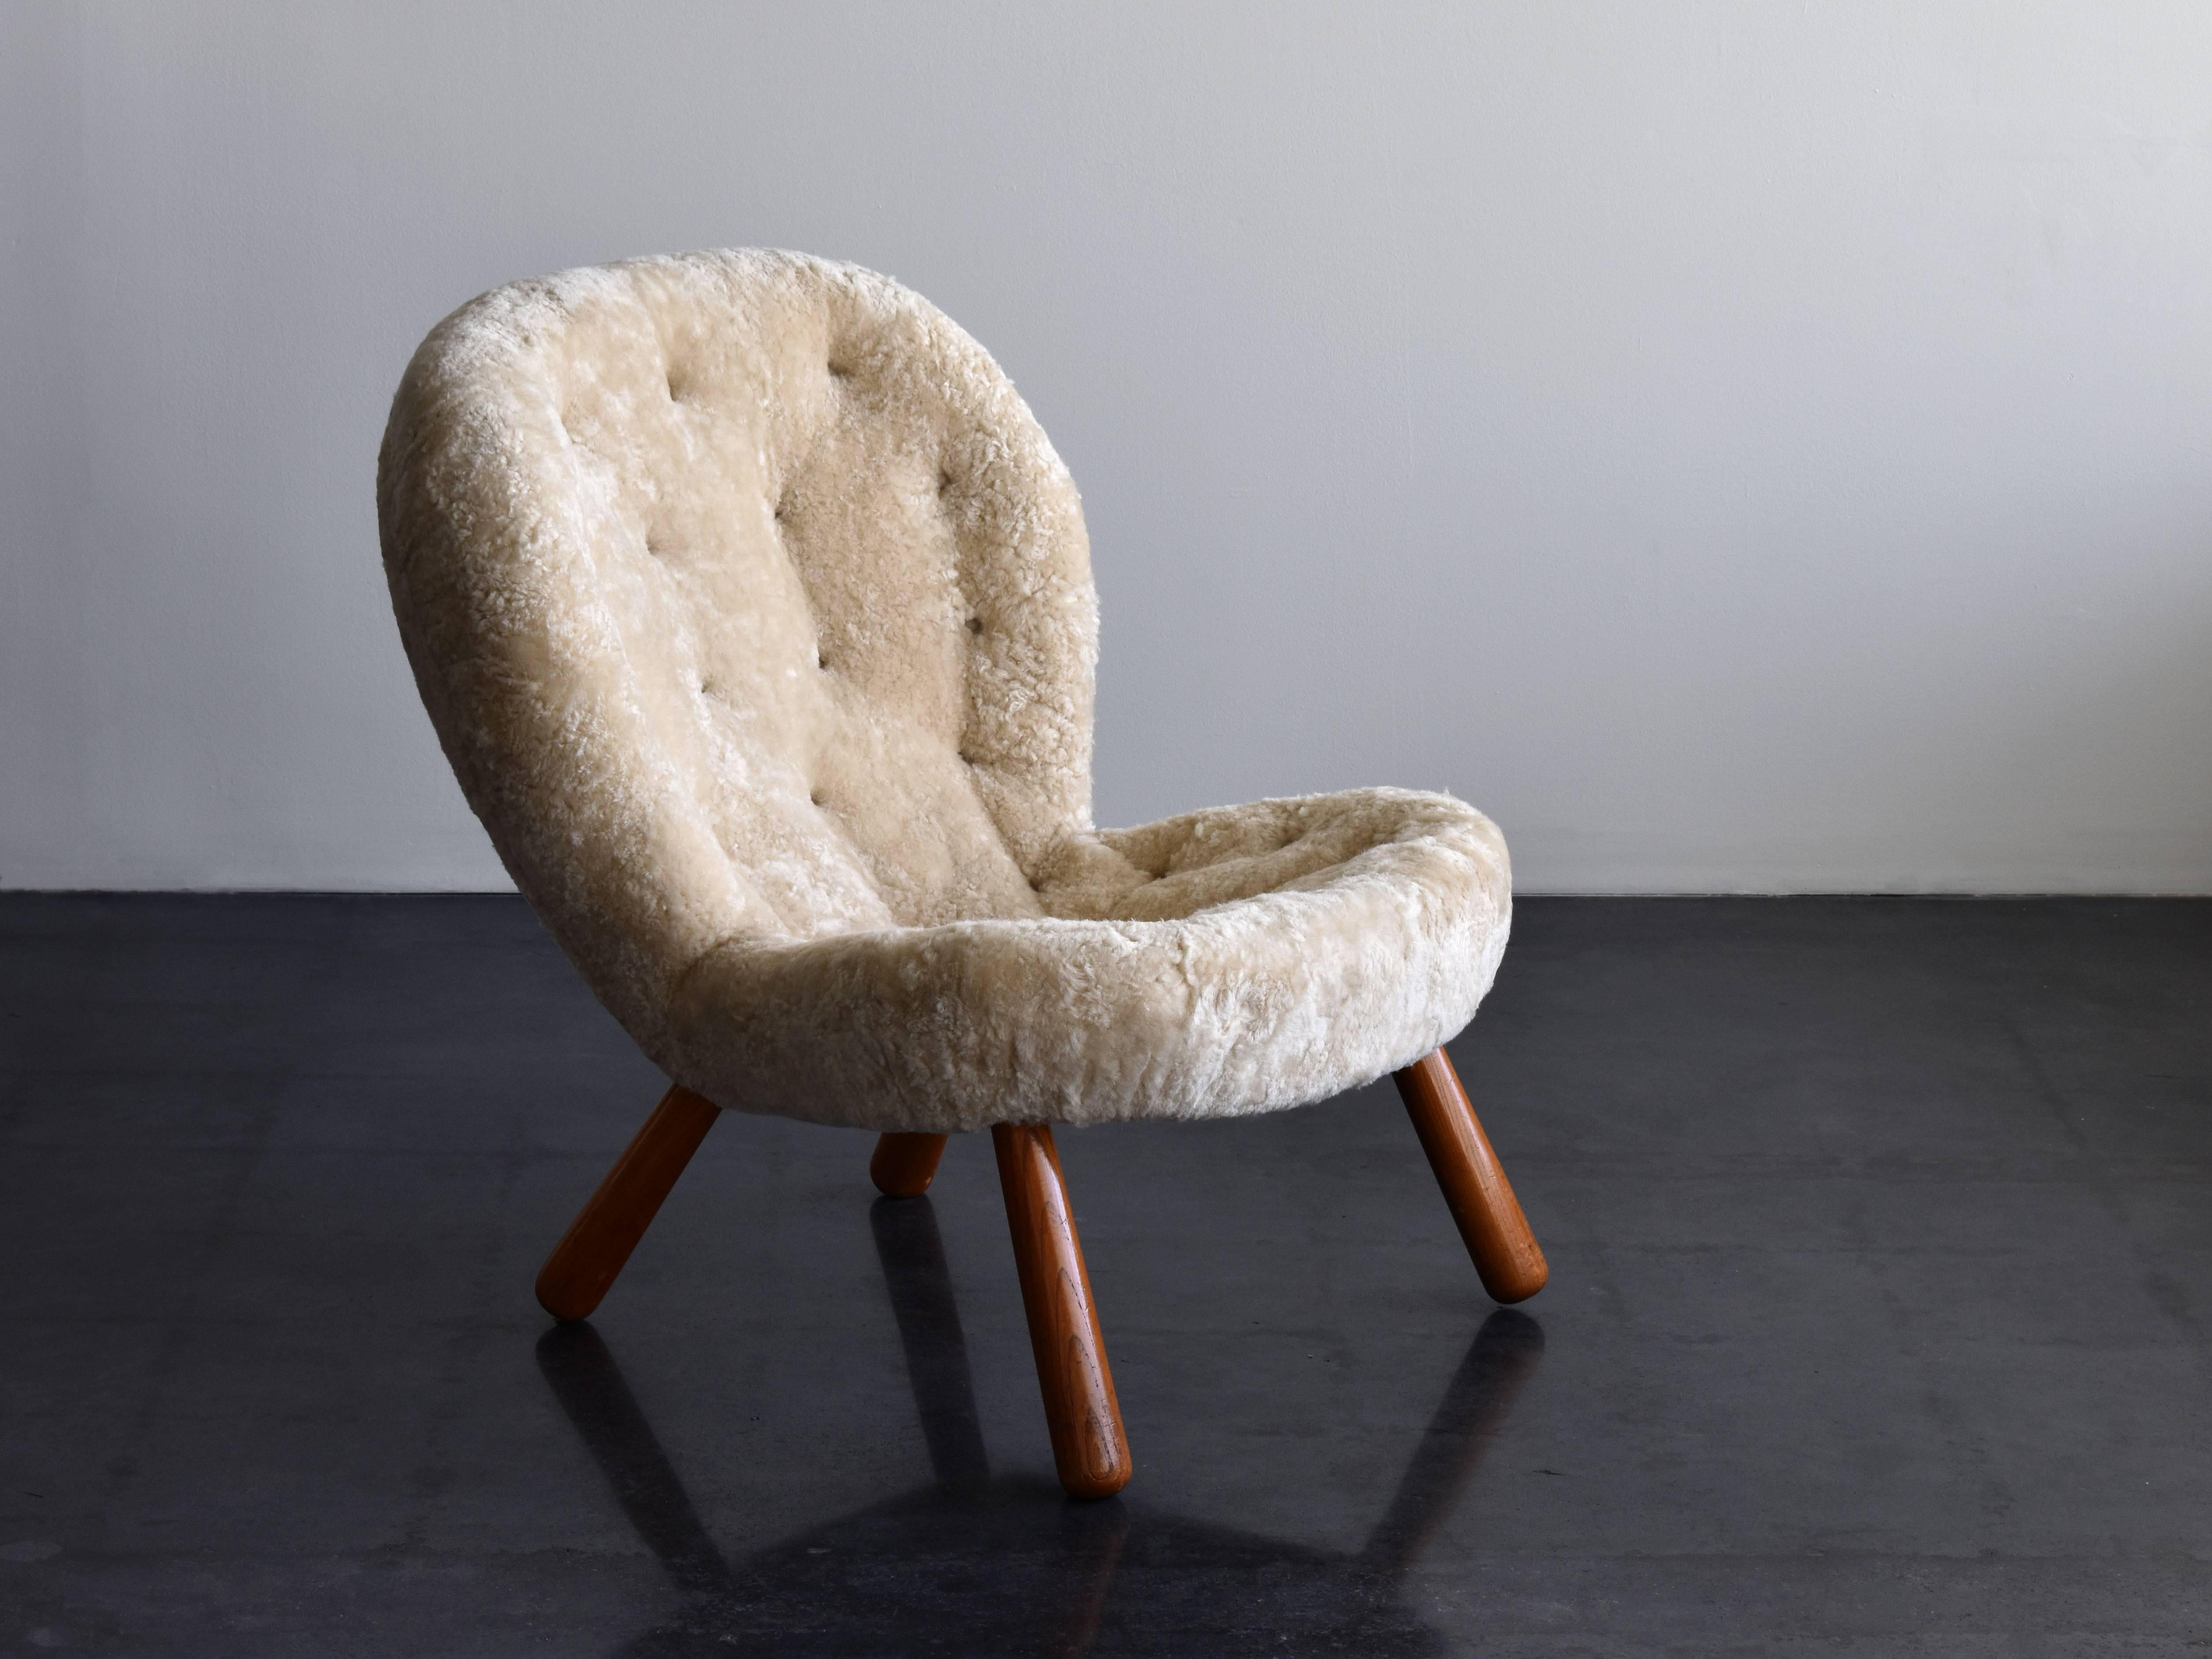 Beautiful and comfortable lounge chair designed by Danish architect Philip Arctander. Recently upholstered in sheep wool. Designed 1944, and manufactured in the 1940s by Nordisk Staal & Møbel Central, Denmark.

Shares it's organic language with